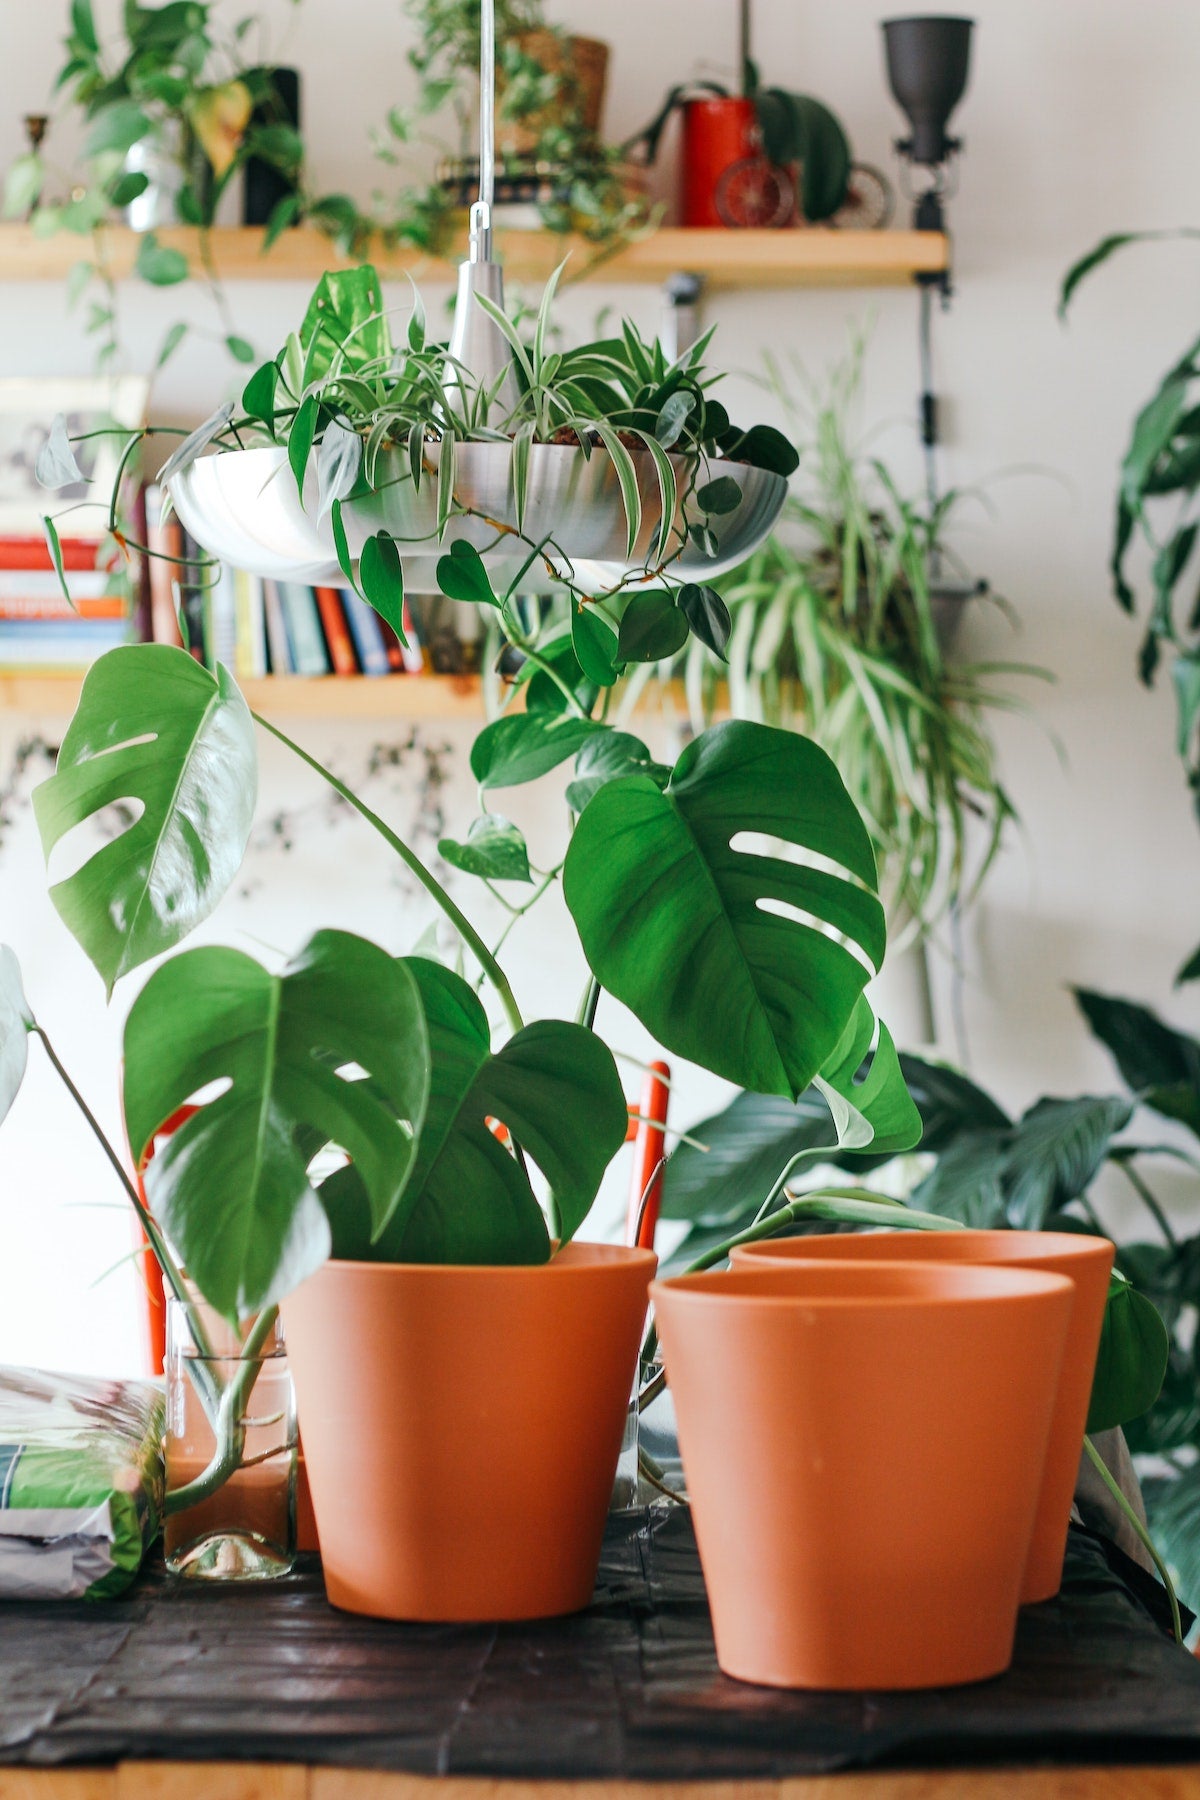 Photo of monstera plants and other houseplants in background